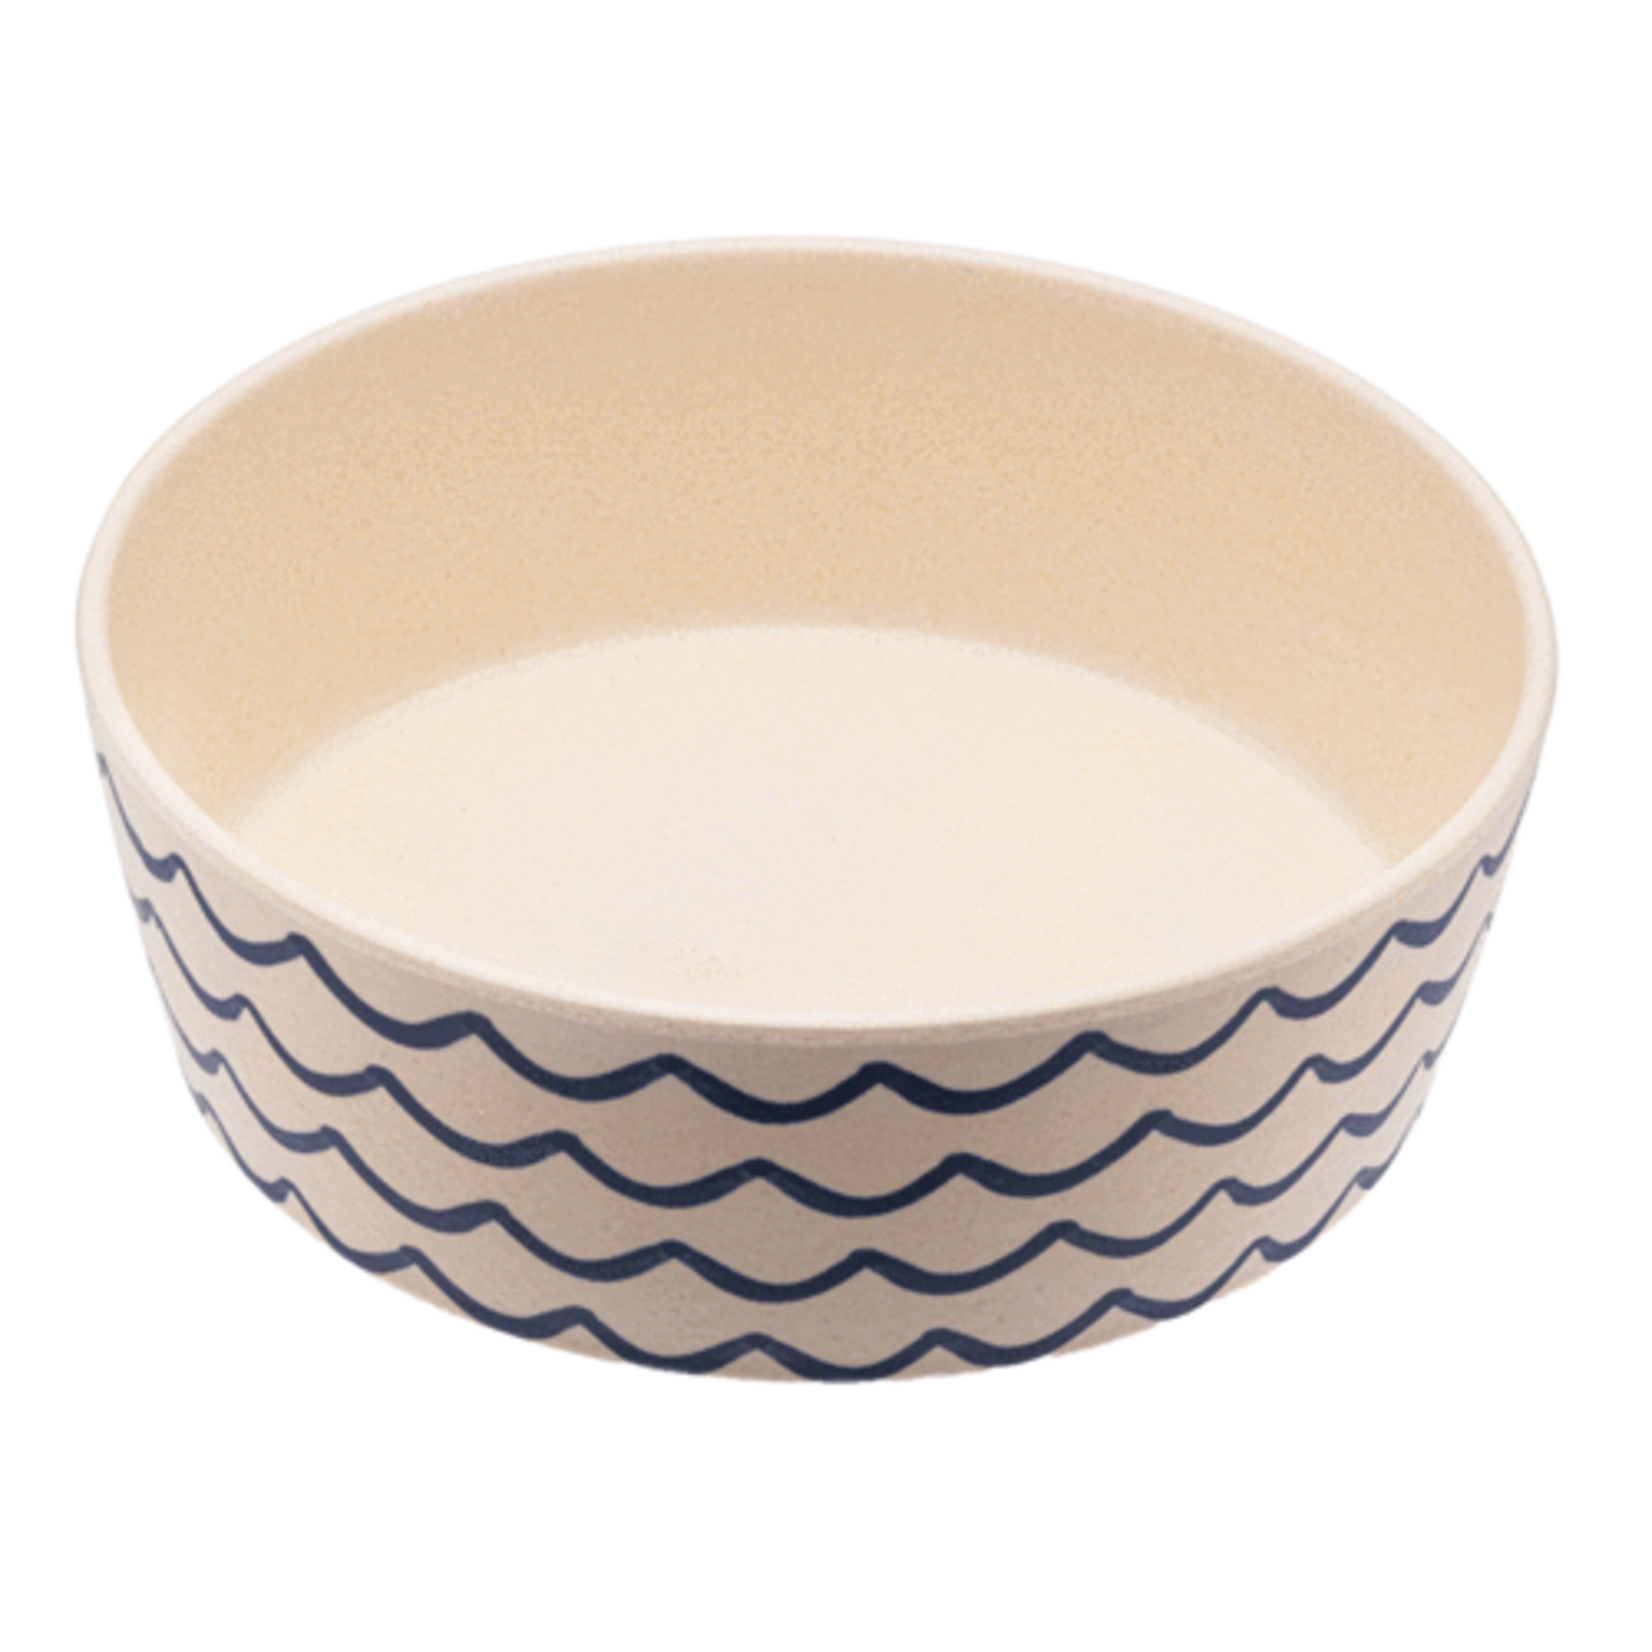 BECO Classic Bamboo Bowl